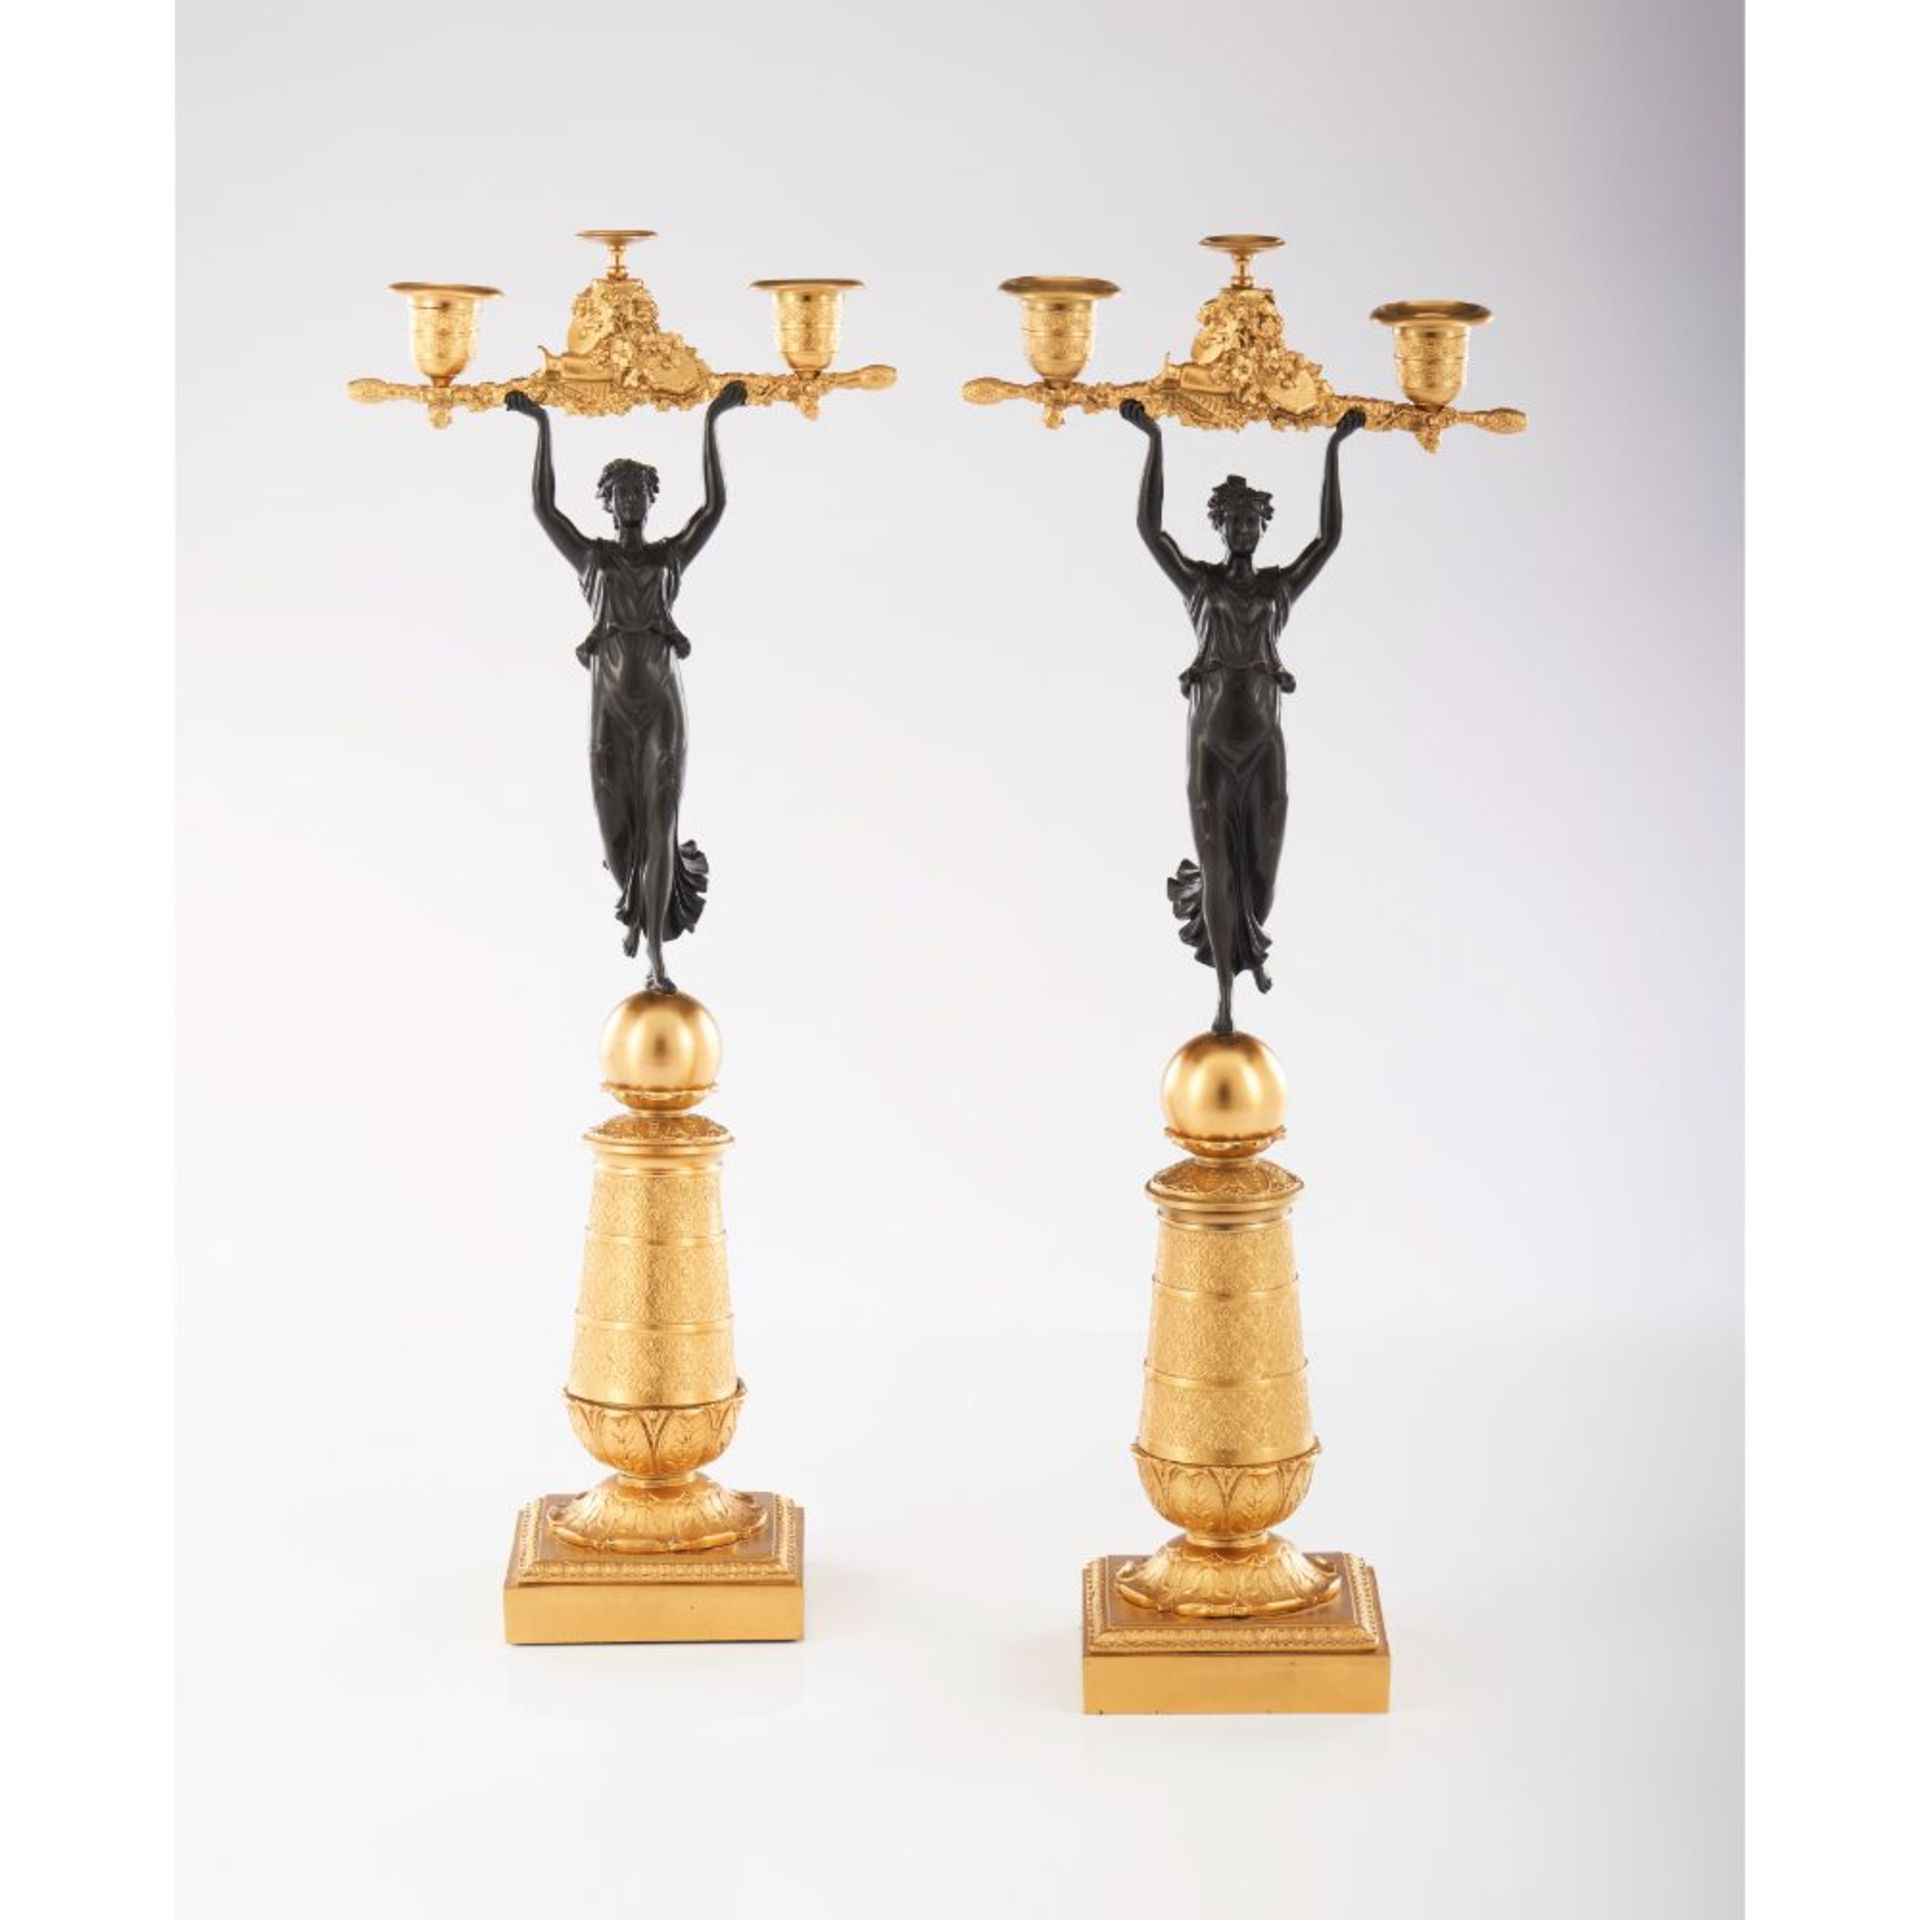 A pair of "Directoire" style two branch candelabra